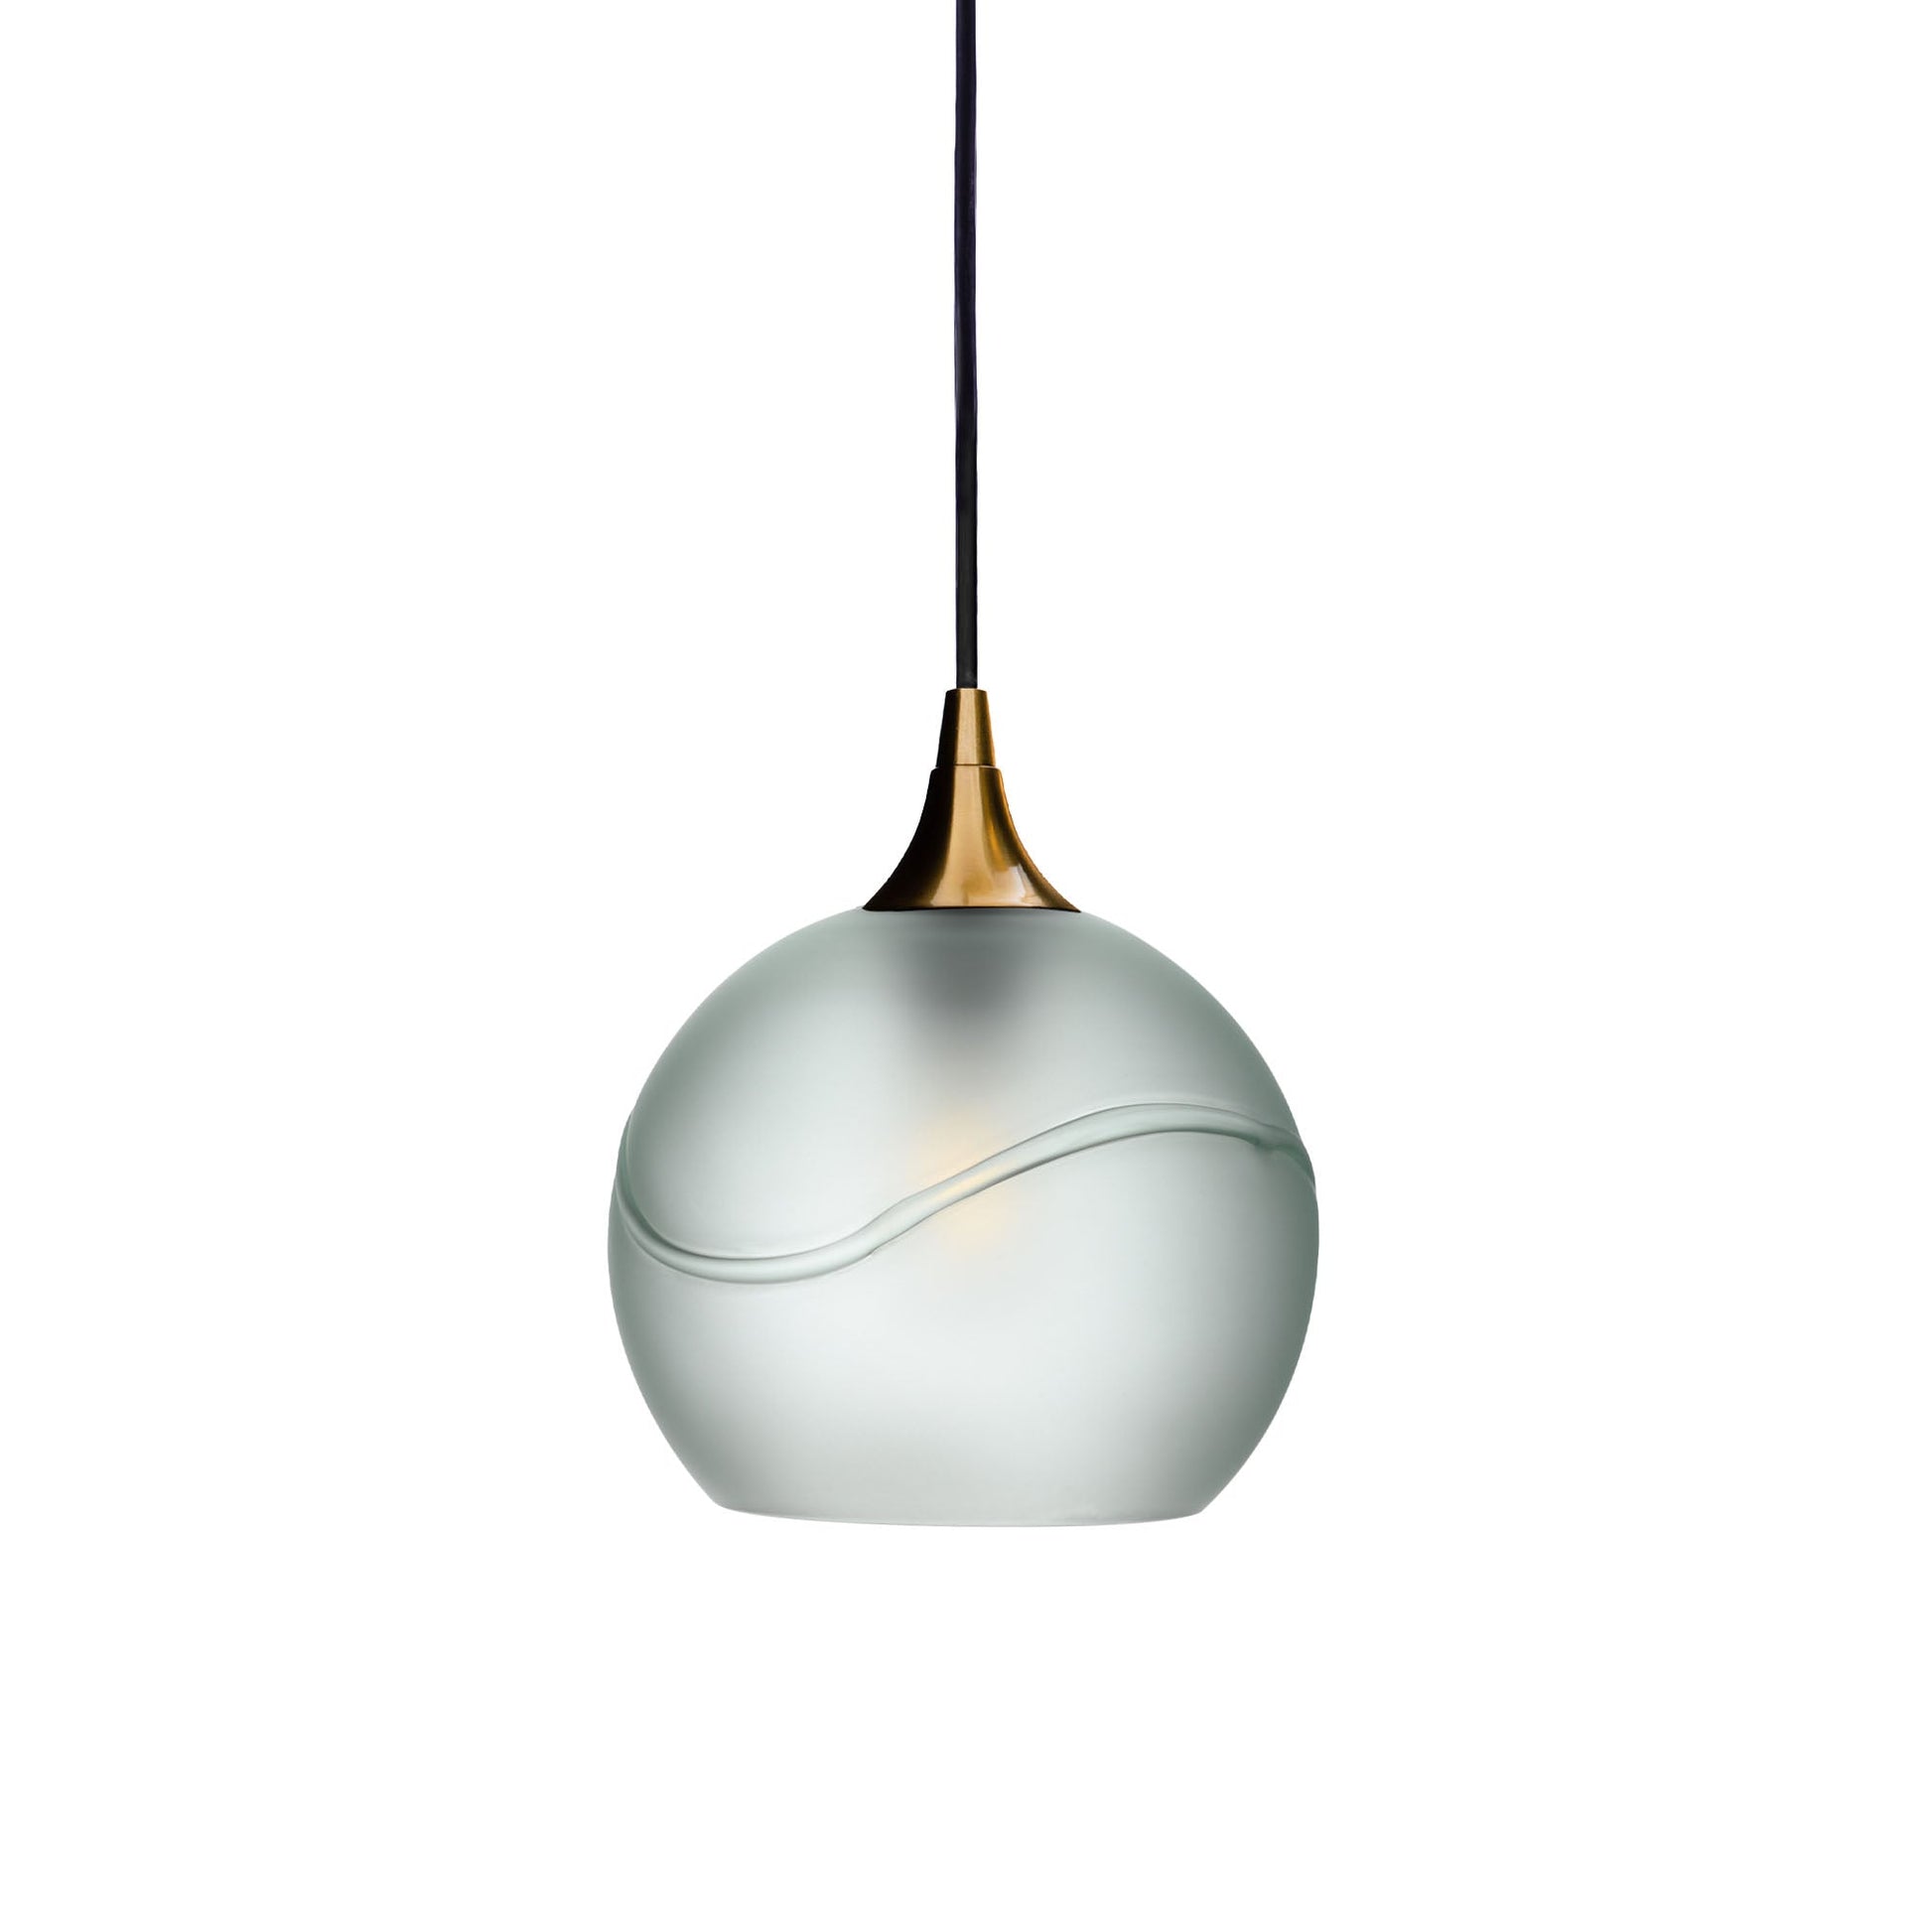 767 Glacial: Single Pendant Light-Pendant Lighting-Bicycle Glass Co - Hotshop-Eco Clear-Polished Brass-Bicycle Glass Co